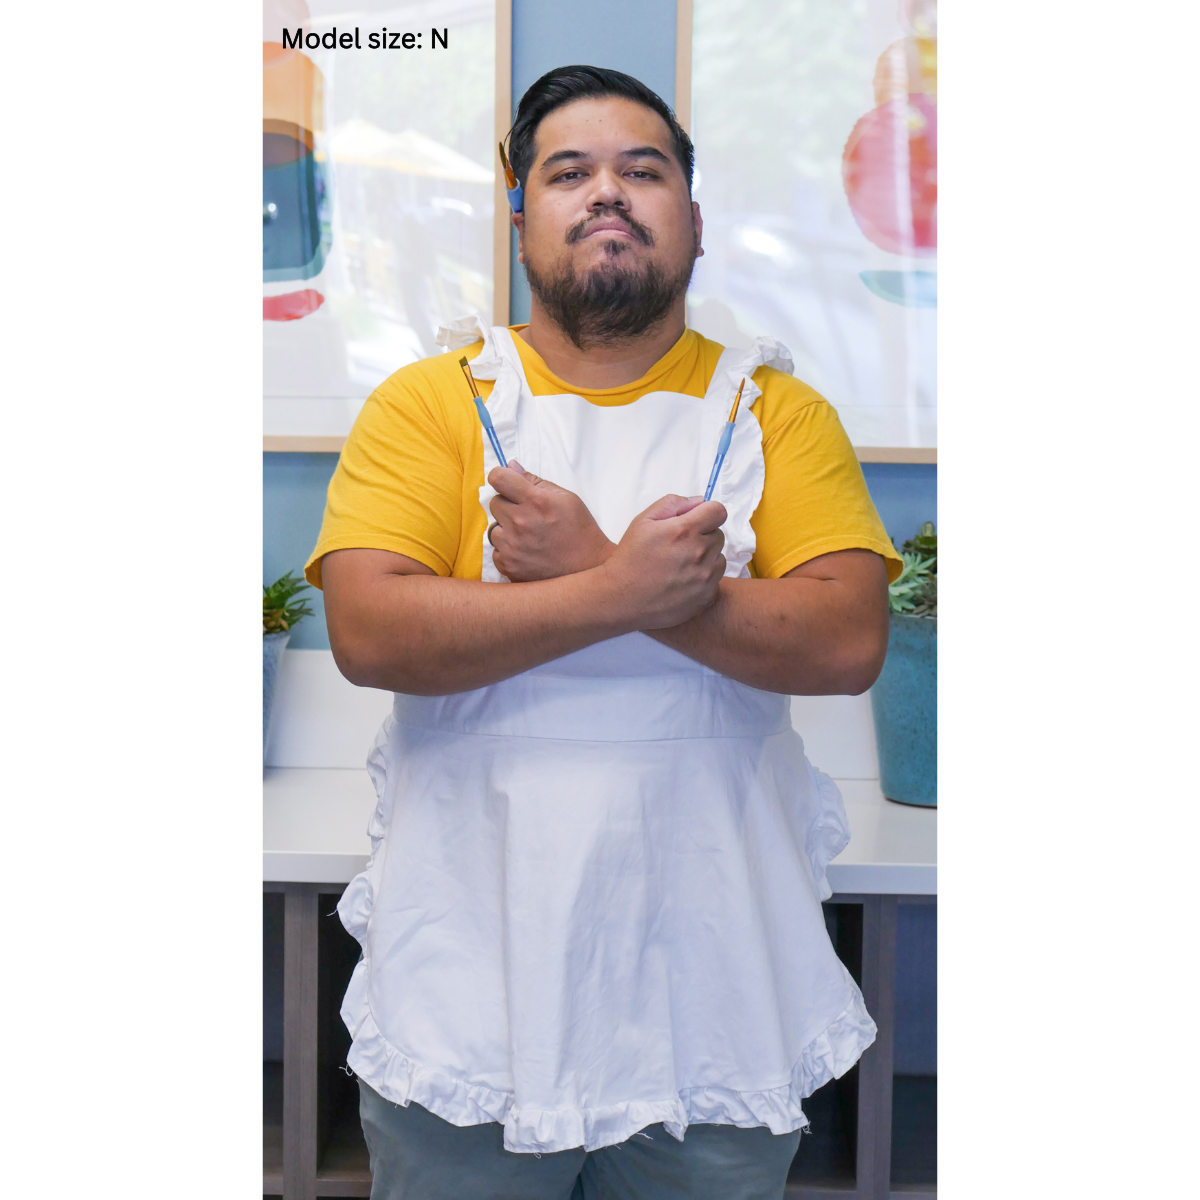 A male plus-size model posing while wearing a solid white apron. The model's arms are crossed, pointing toward his shoulders, and he is holding a paintbrush in each hand. The model is size N.